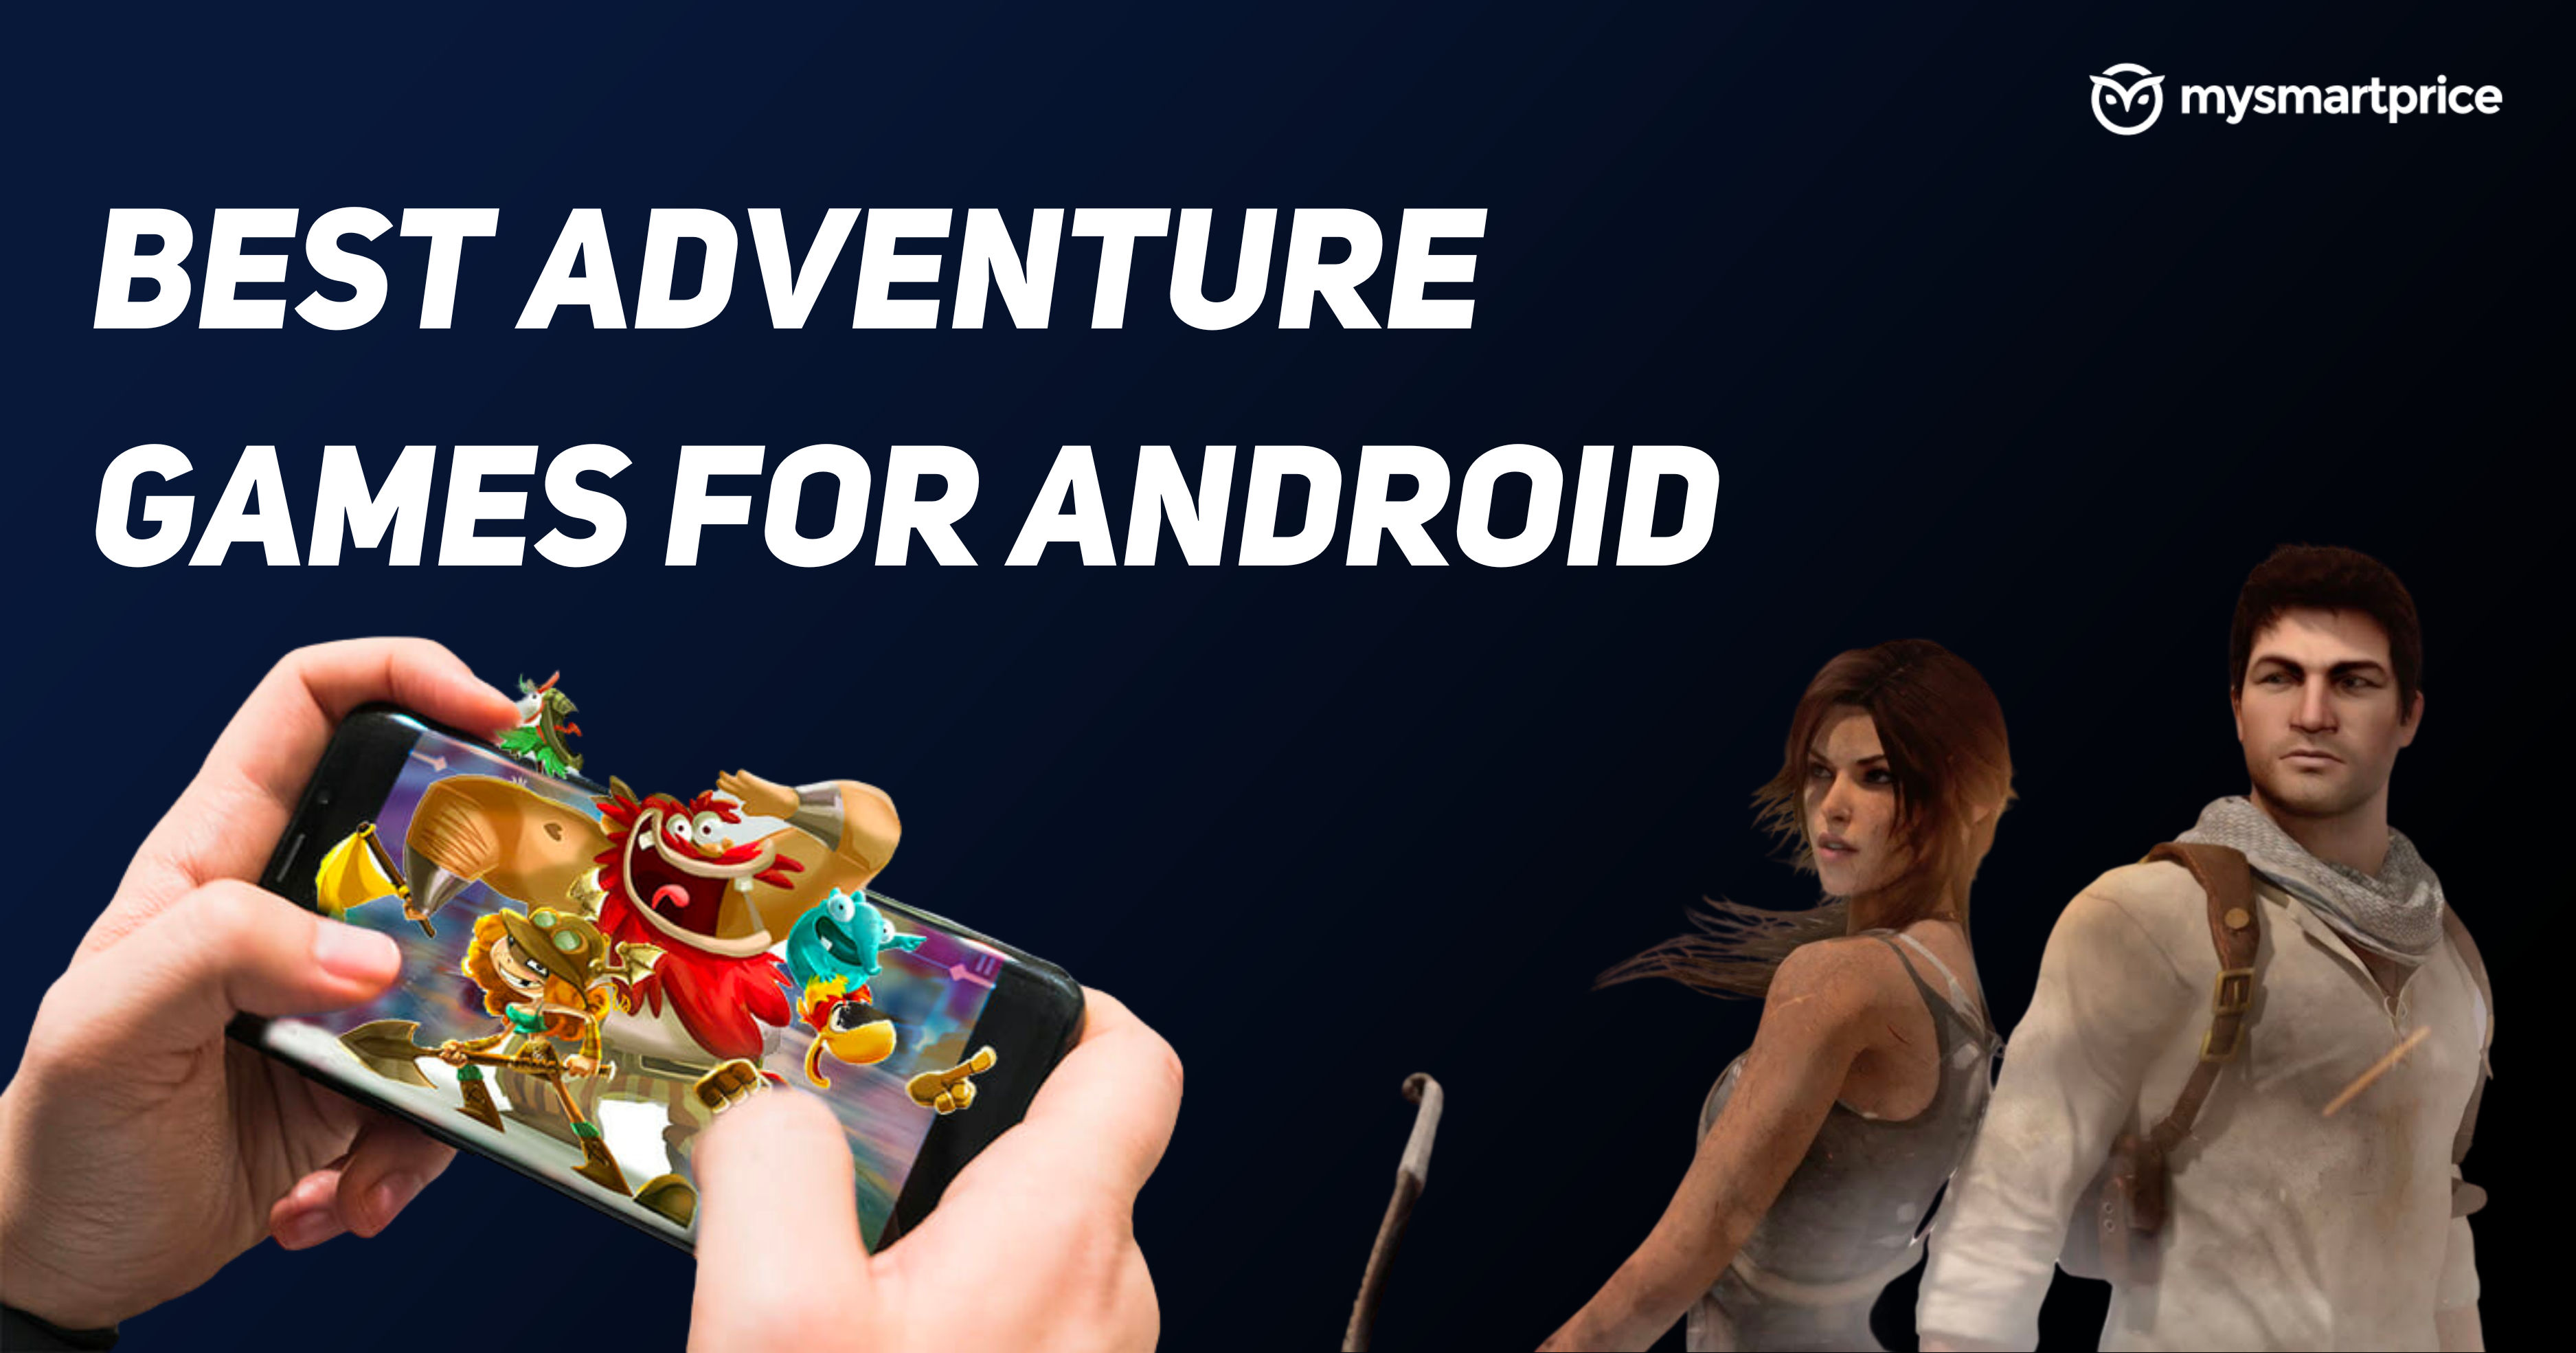 One Tap Space Adventure Paid APK Android Free Download